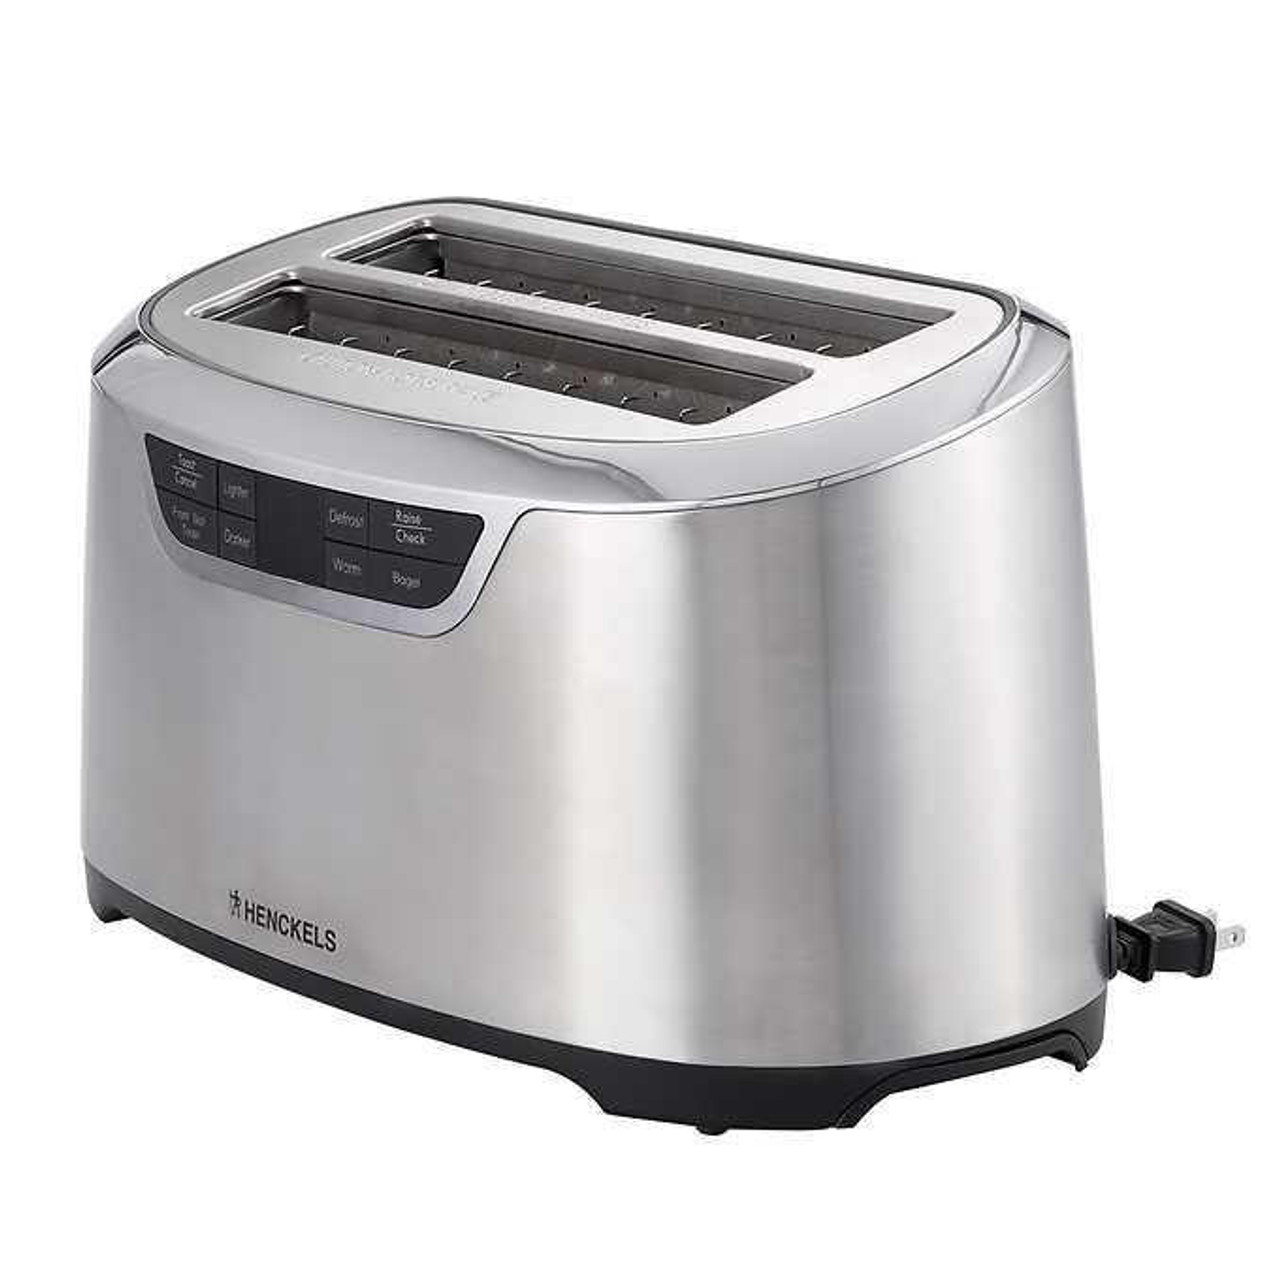 All-Clad Stainless Steel 4-Slice Toaster